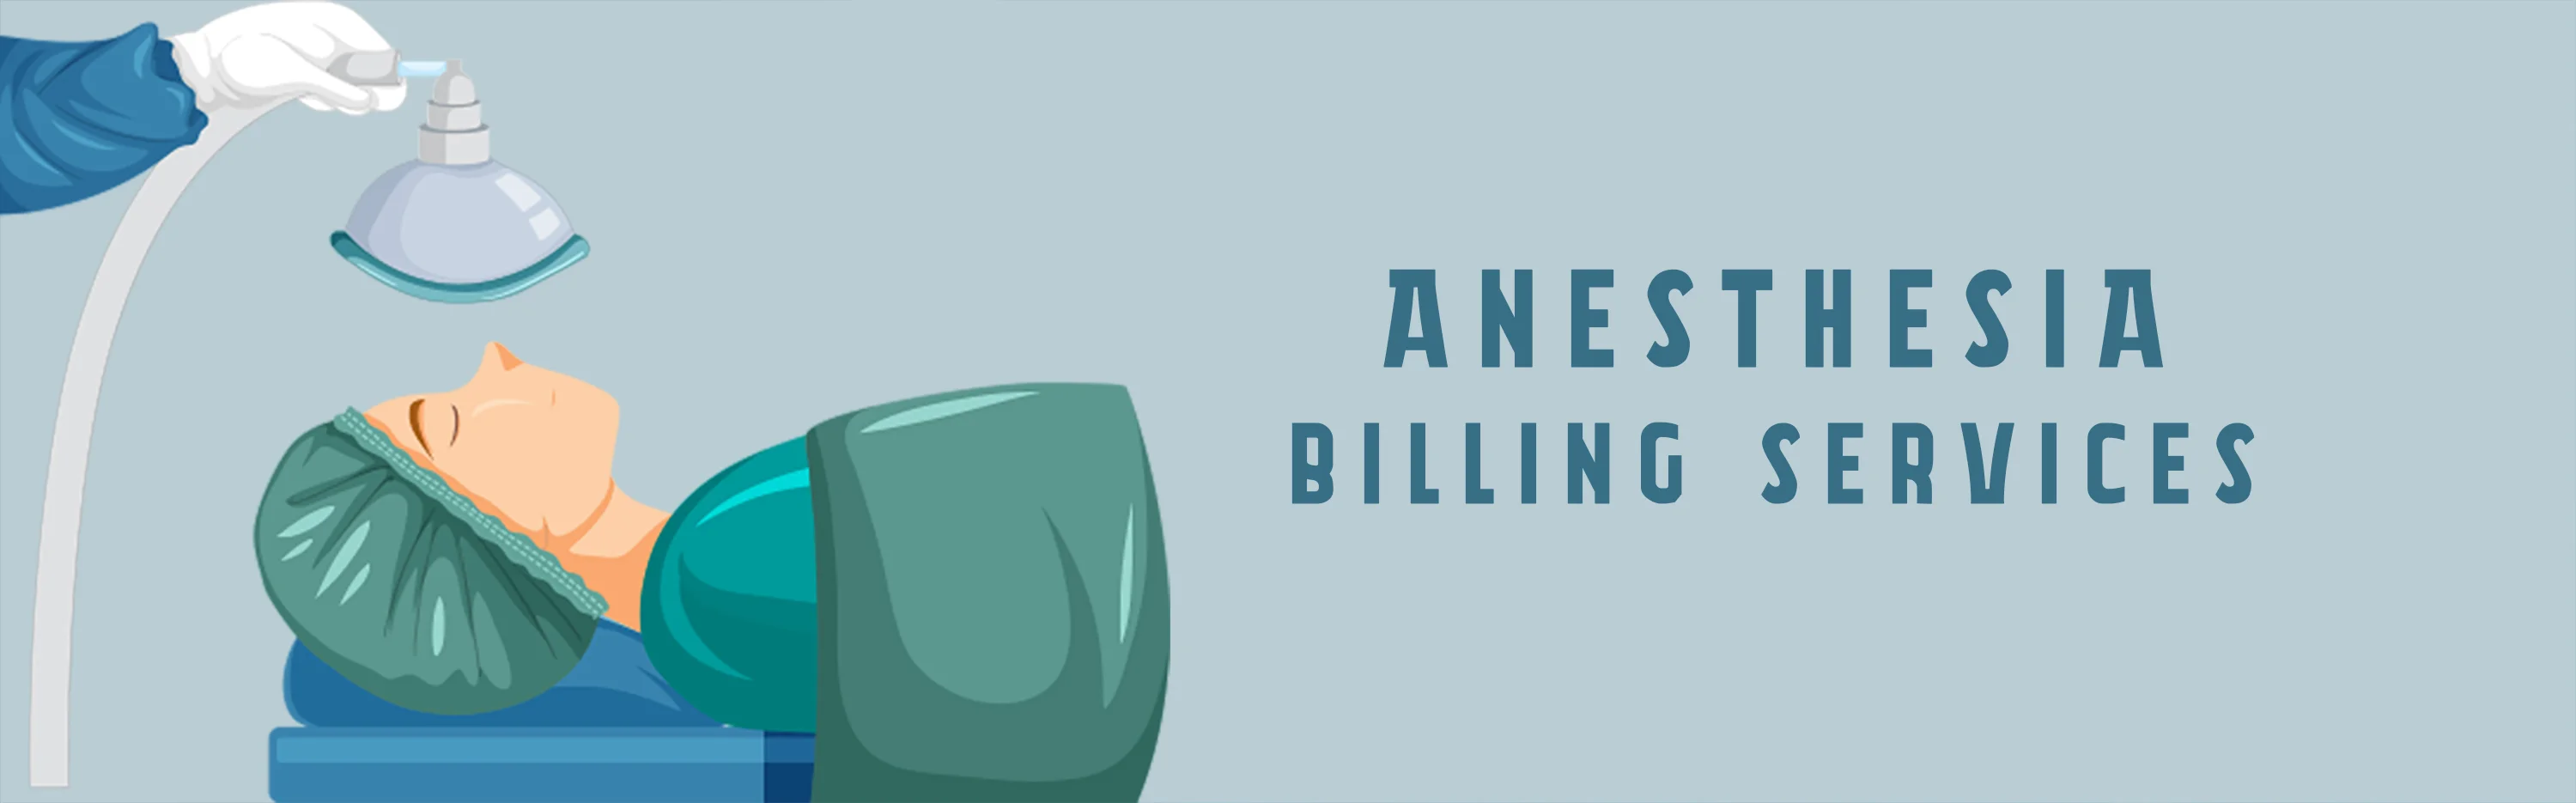 Atlantic RCM – Anesthesia Medical Billing Services